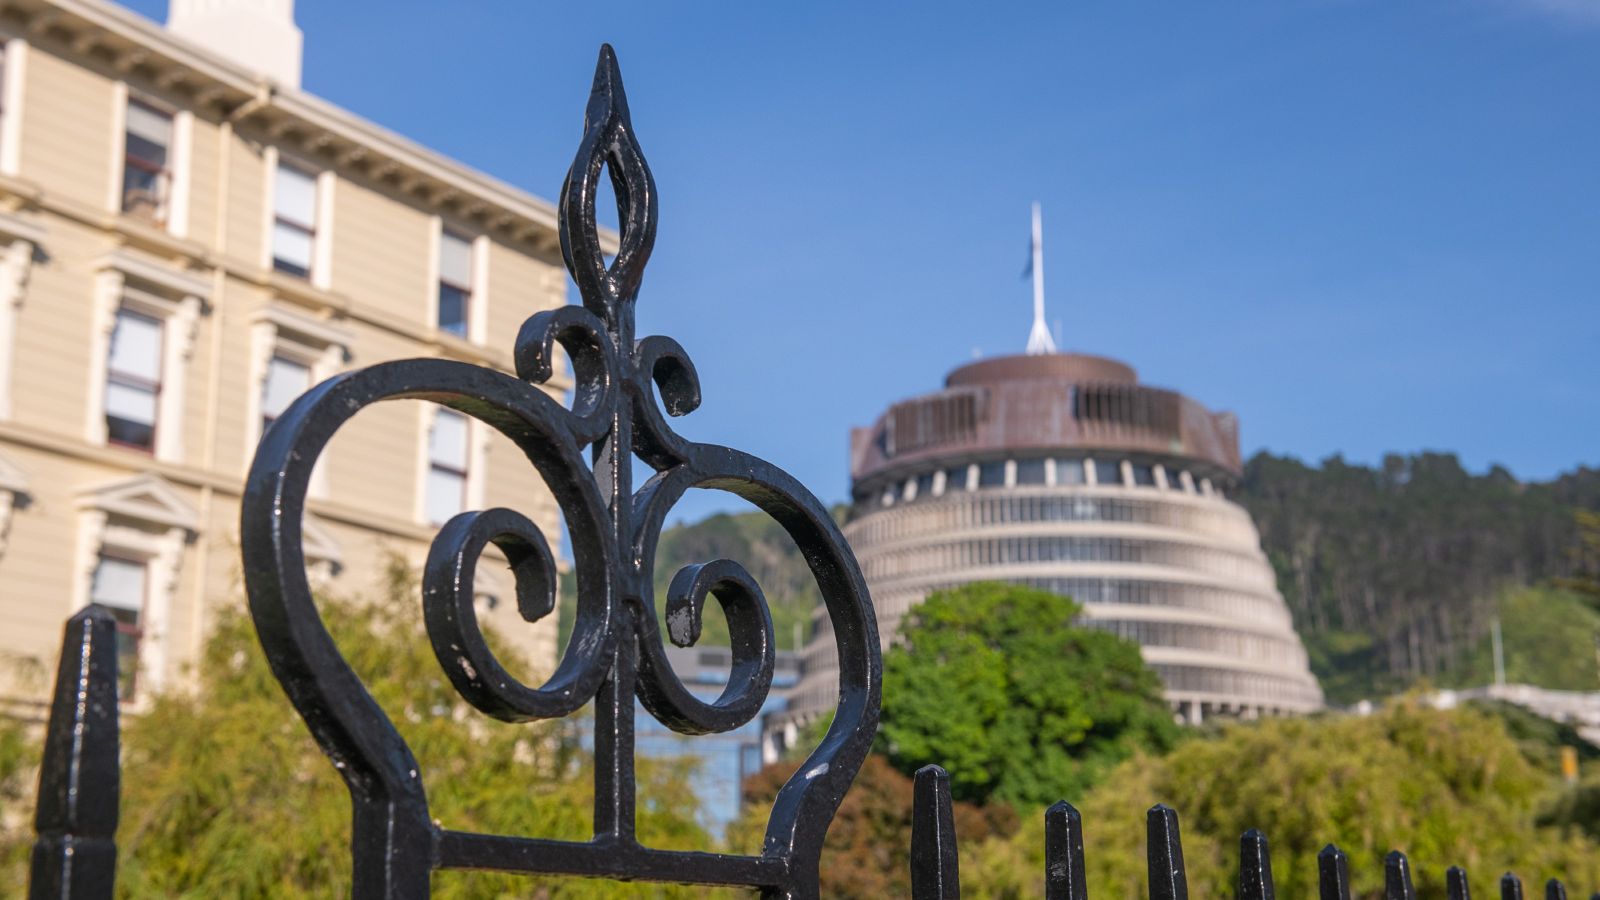 Crown-shaped black gate in foreground with NZ parliament building in background